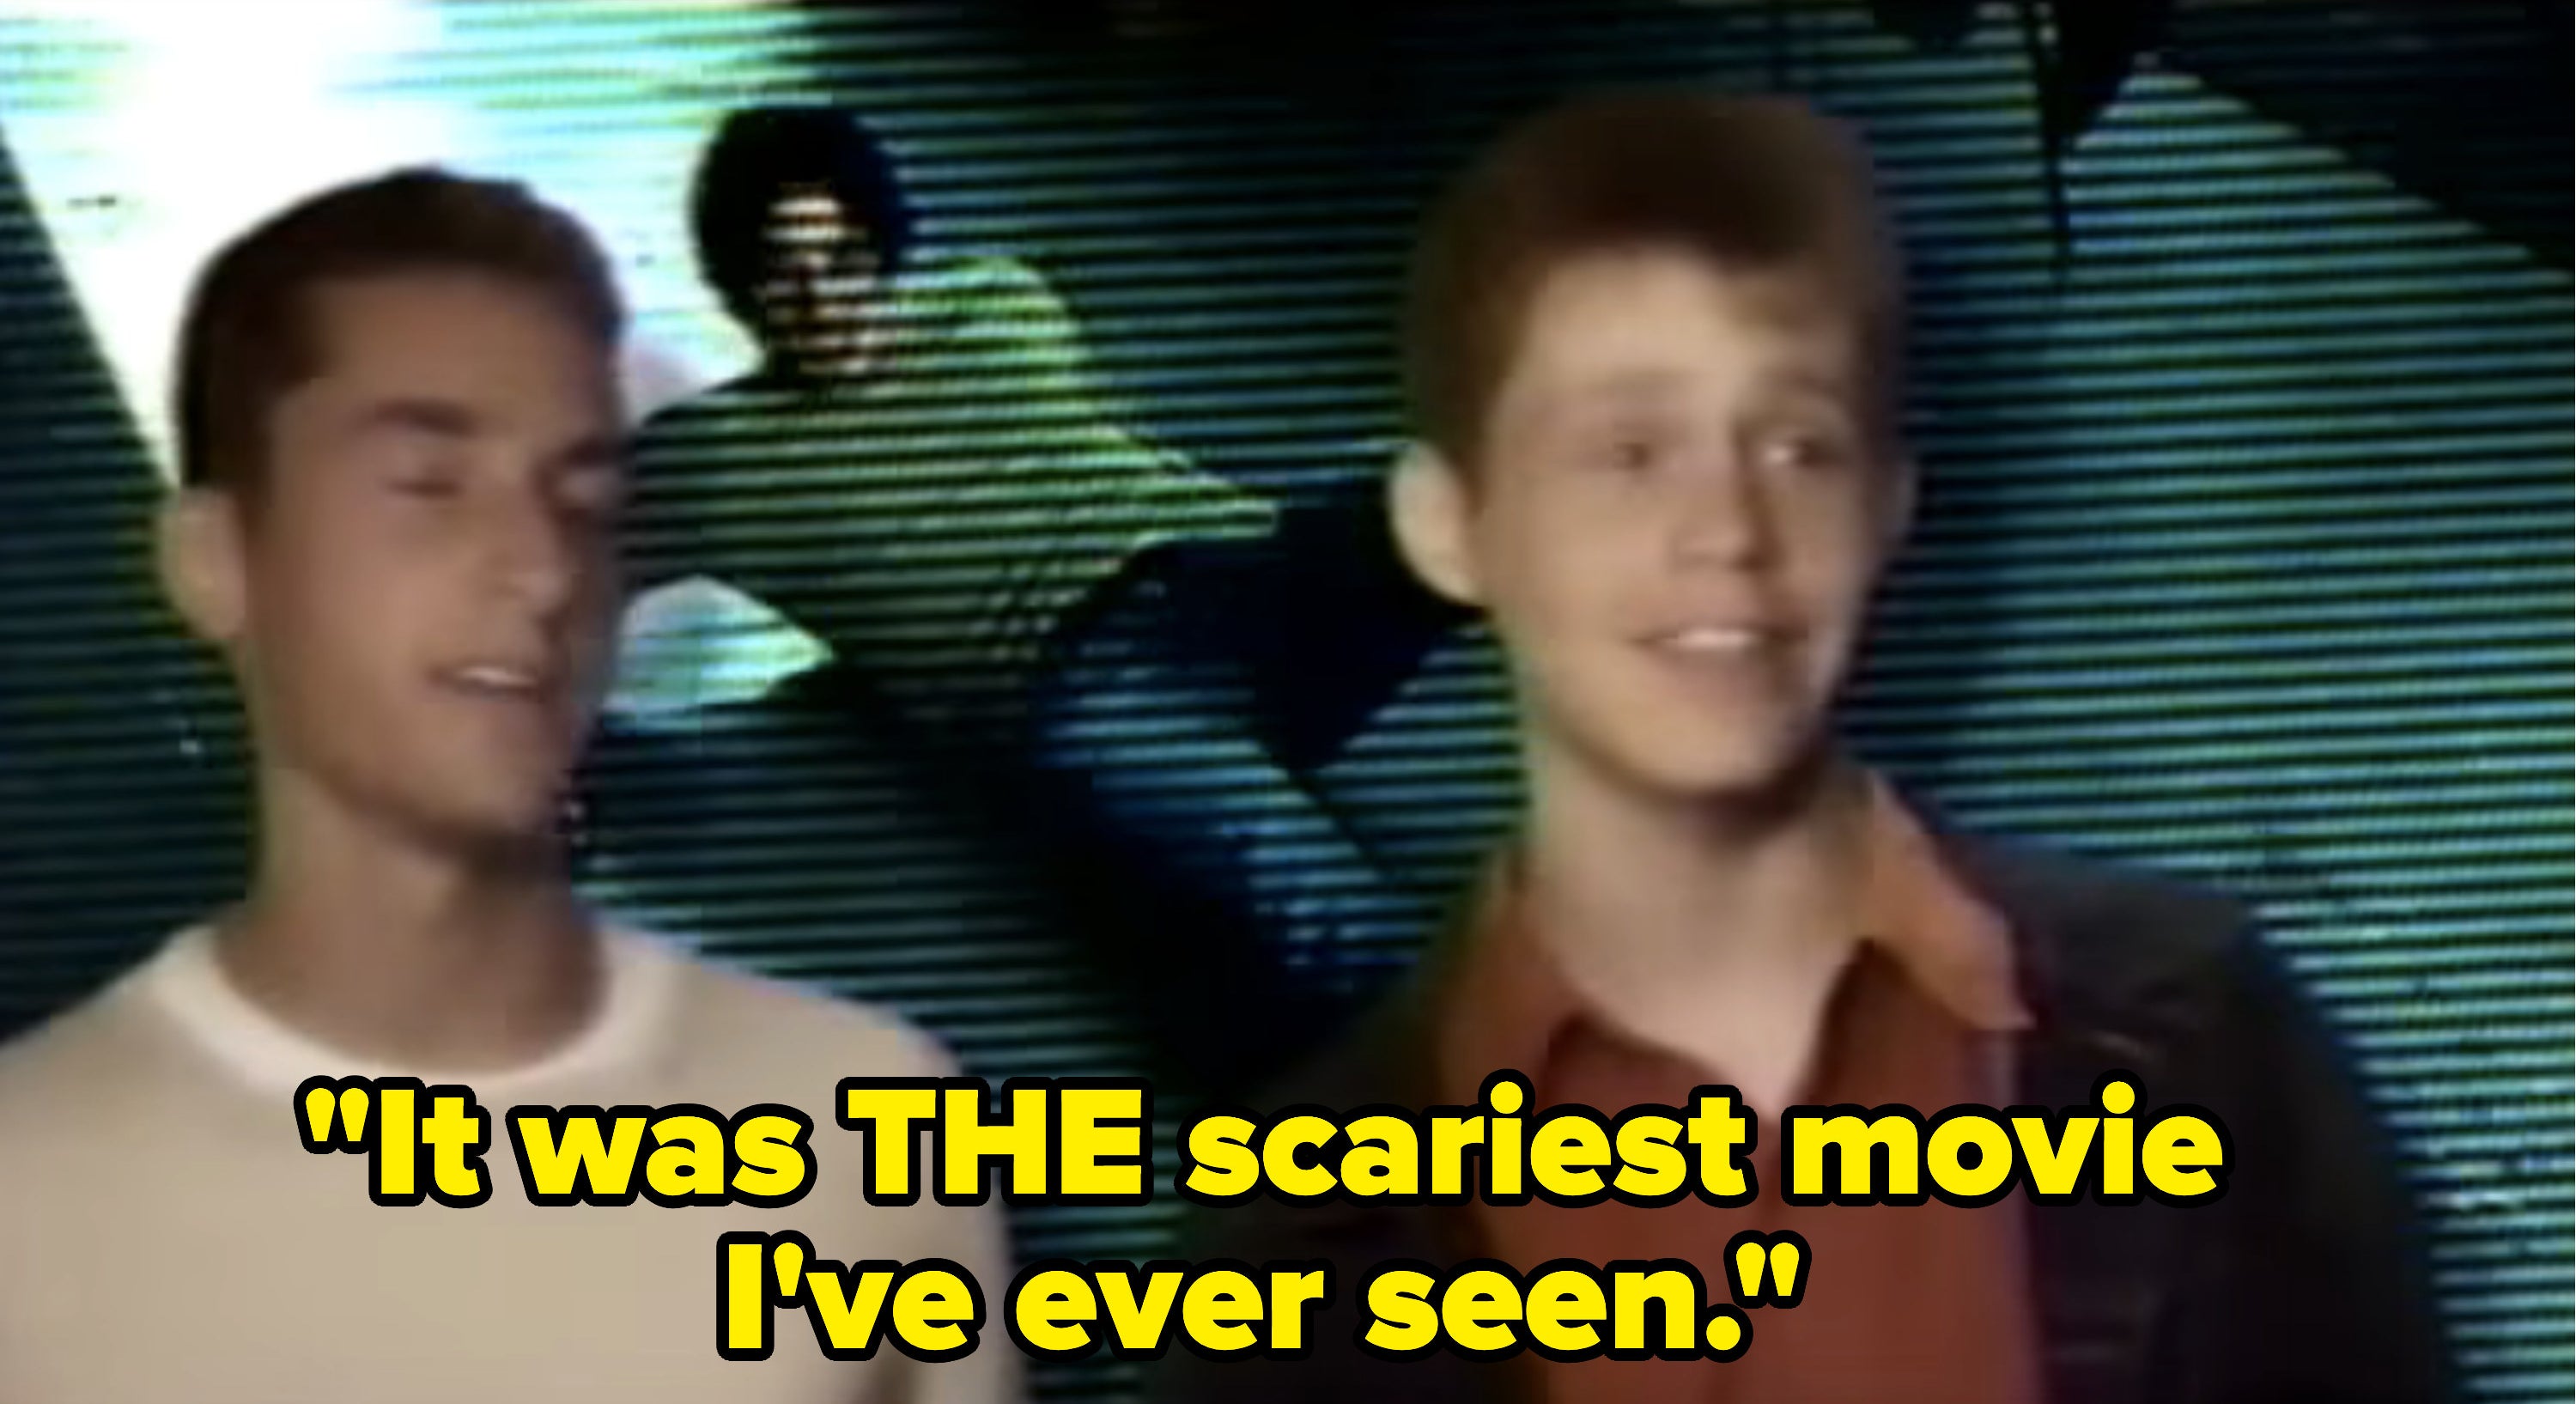 &quot;It was THE scariest movie I&#x27;ve ever seen.&quot;